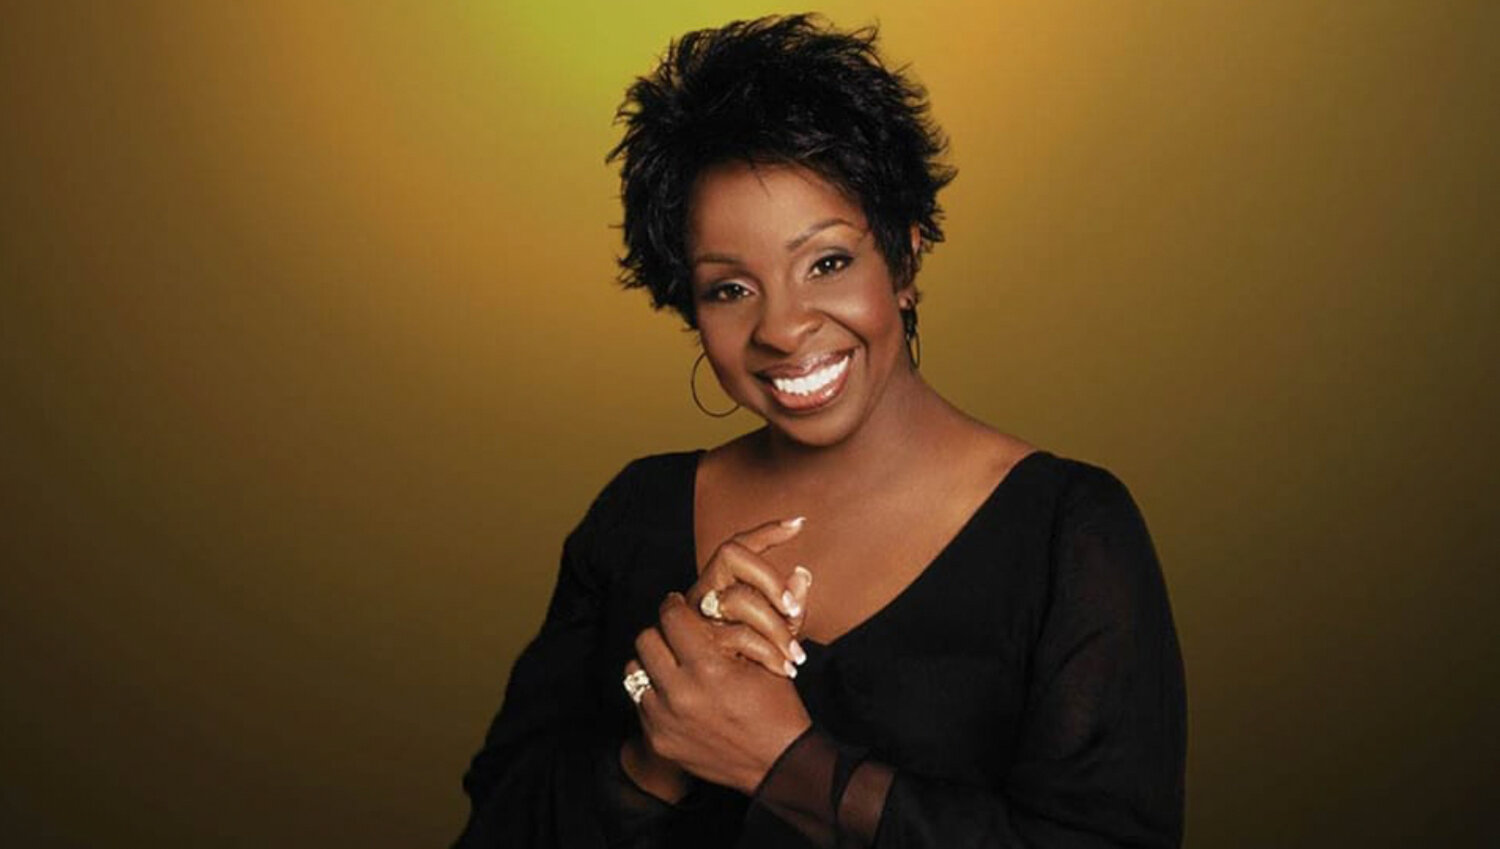 Gladys Knight will perform in Fayetteville on Friday.